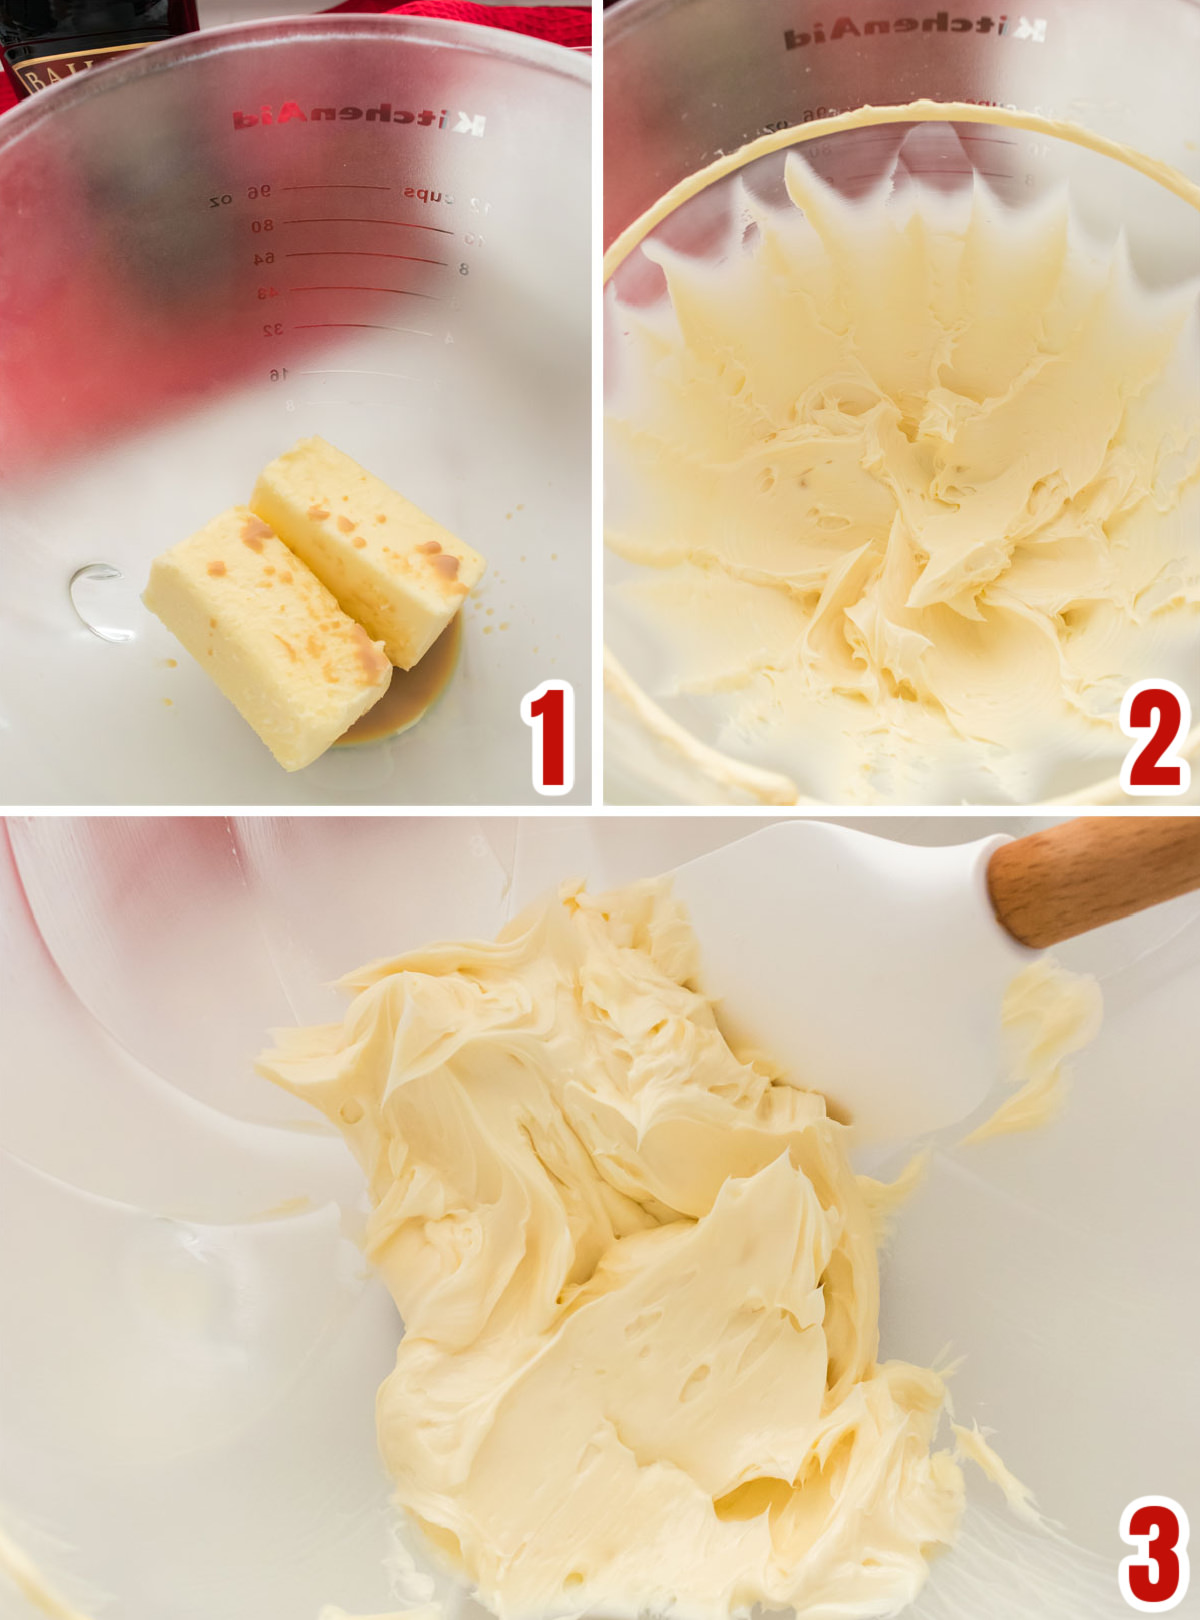 Collage image showing the steps for mixing the Baileys Irish Cream with the butter to make the most flavorful frosting.